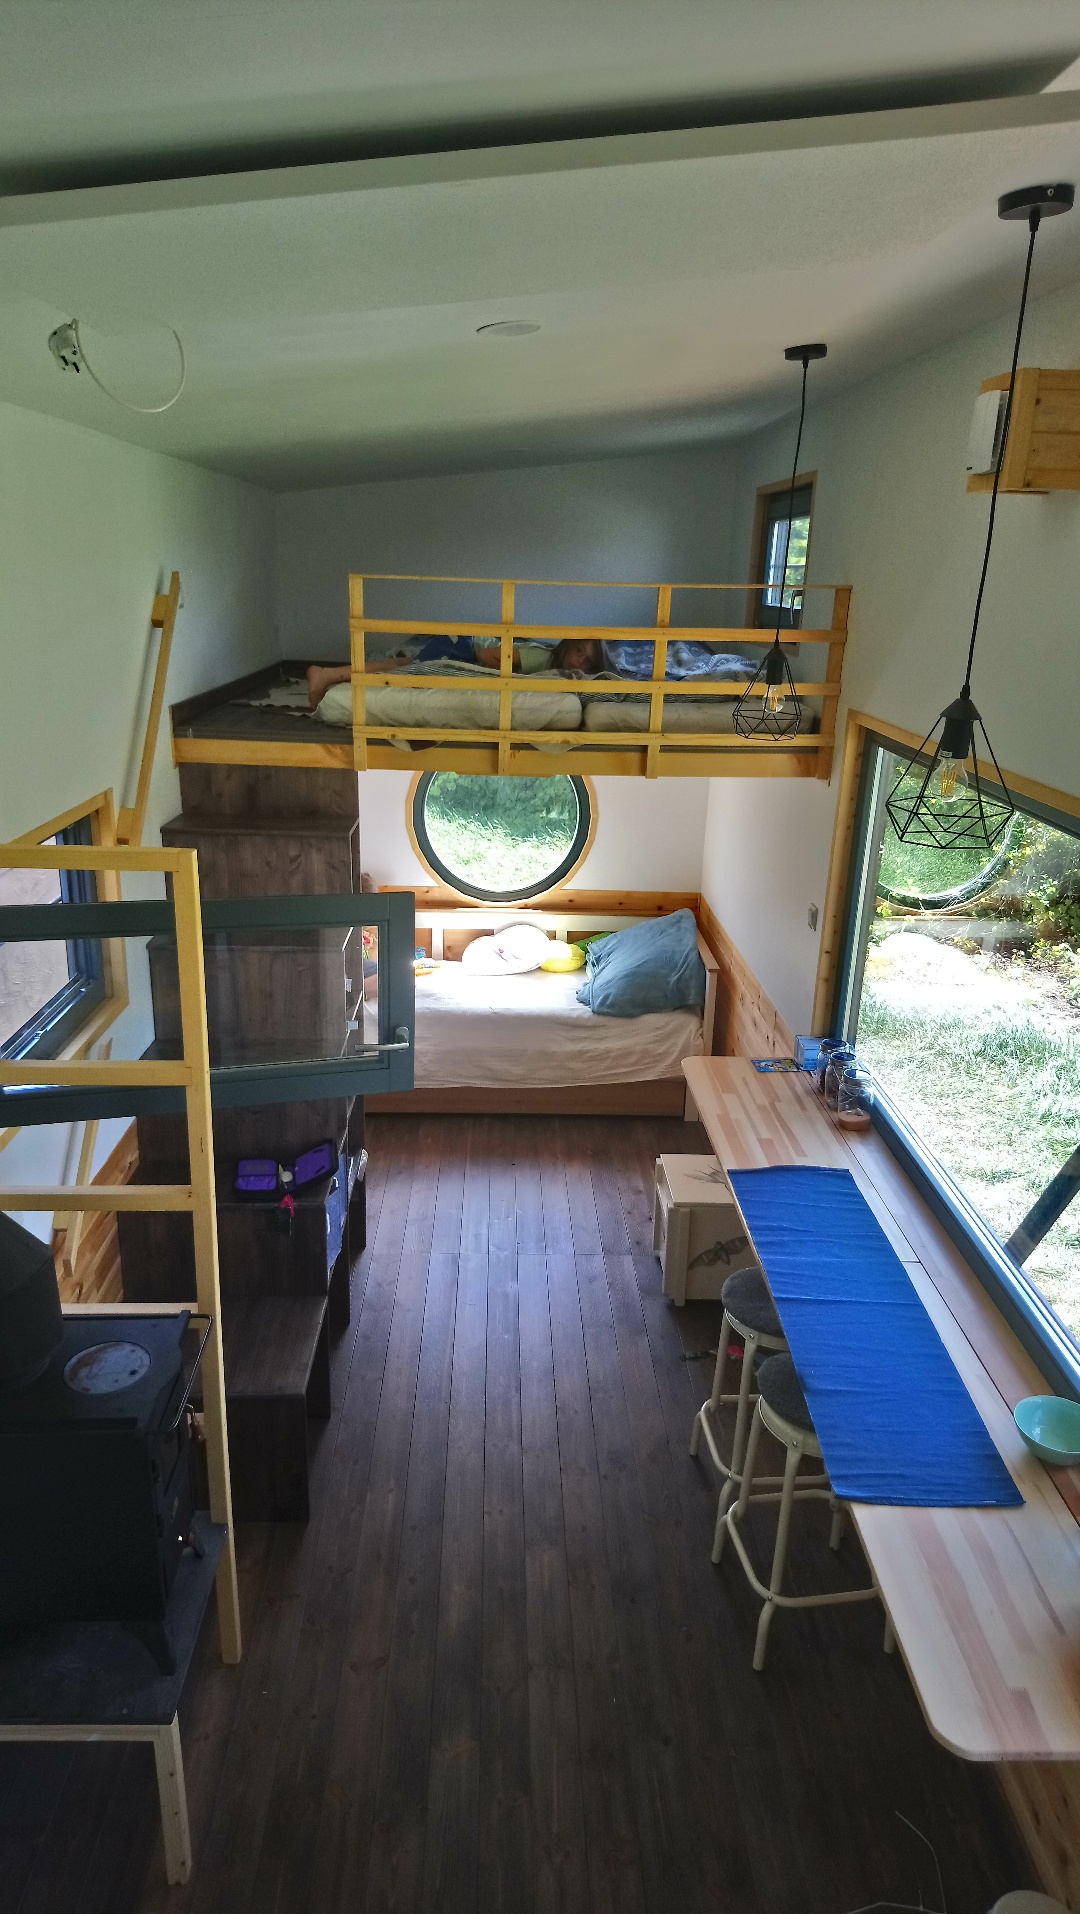 Interior view of a small room with bunk beds and a table